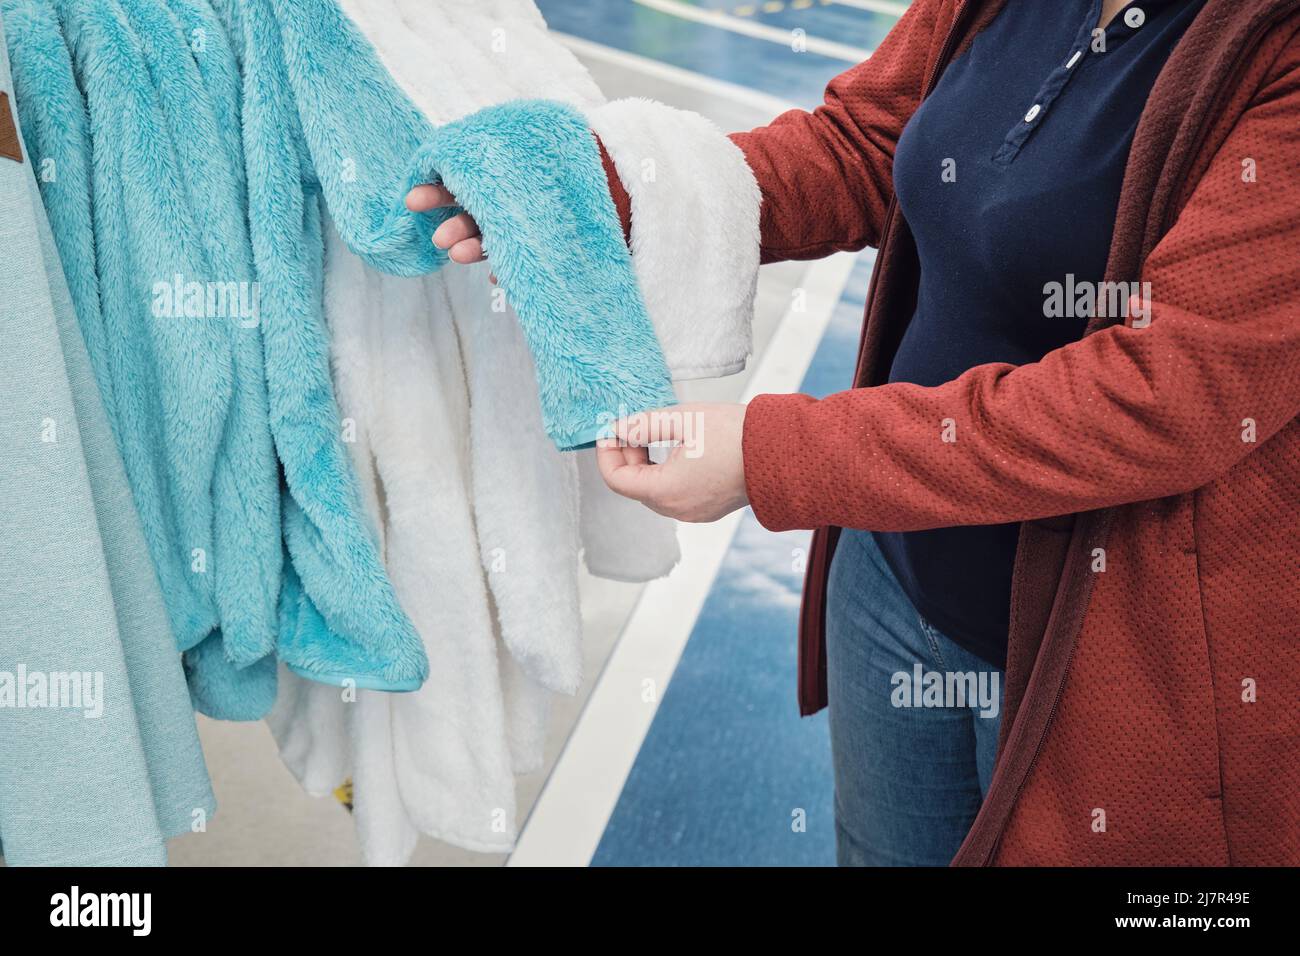 Woman wearing a mask against the virus chooses a soft turquoise robe Stock Photo